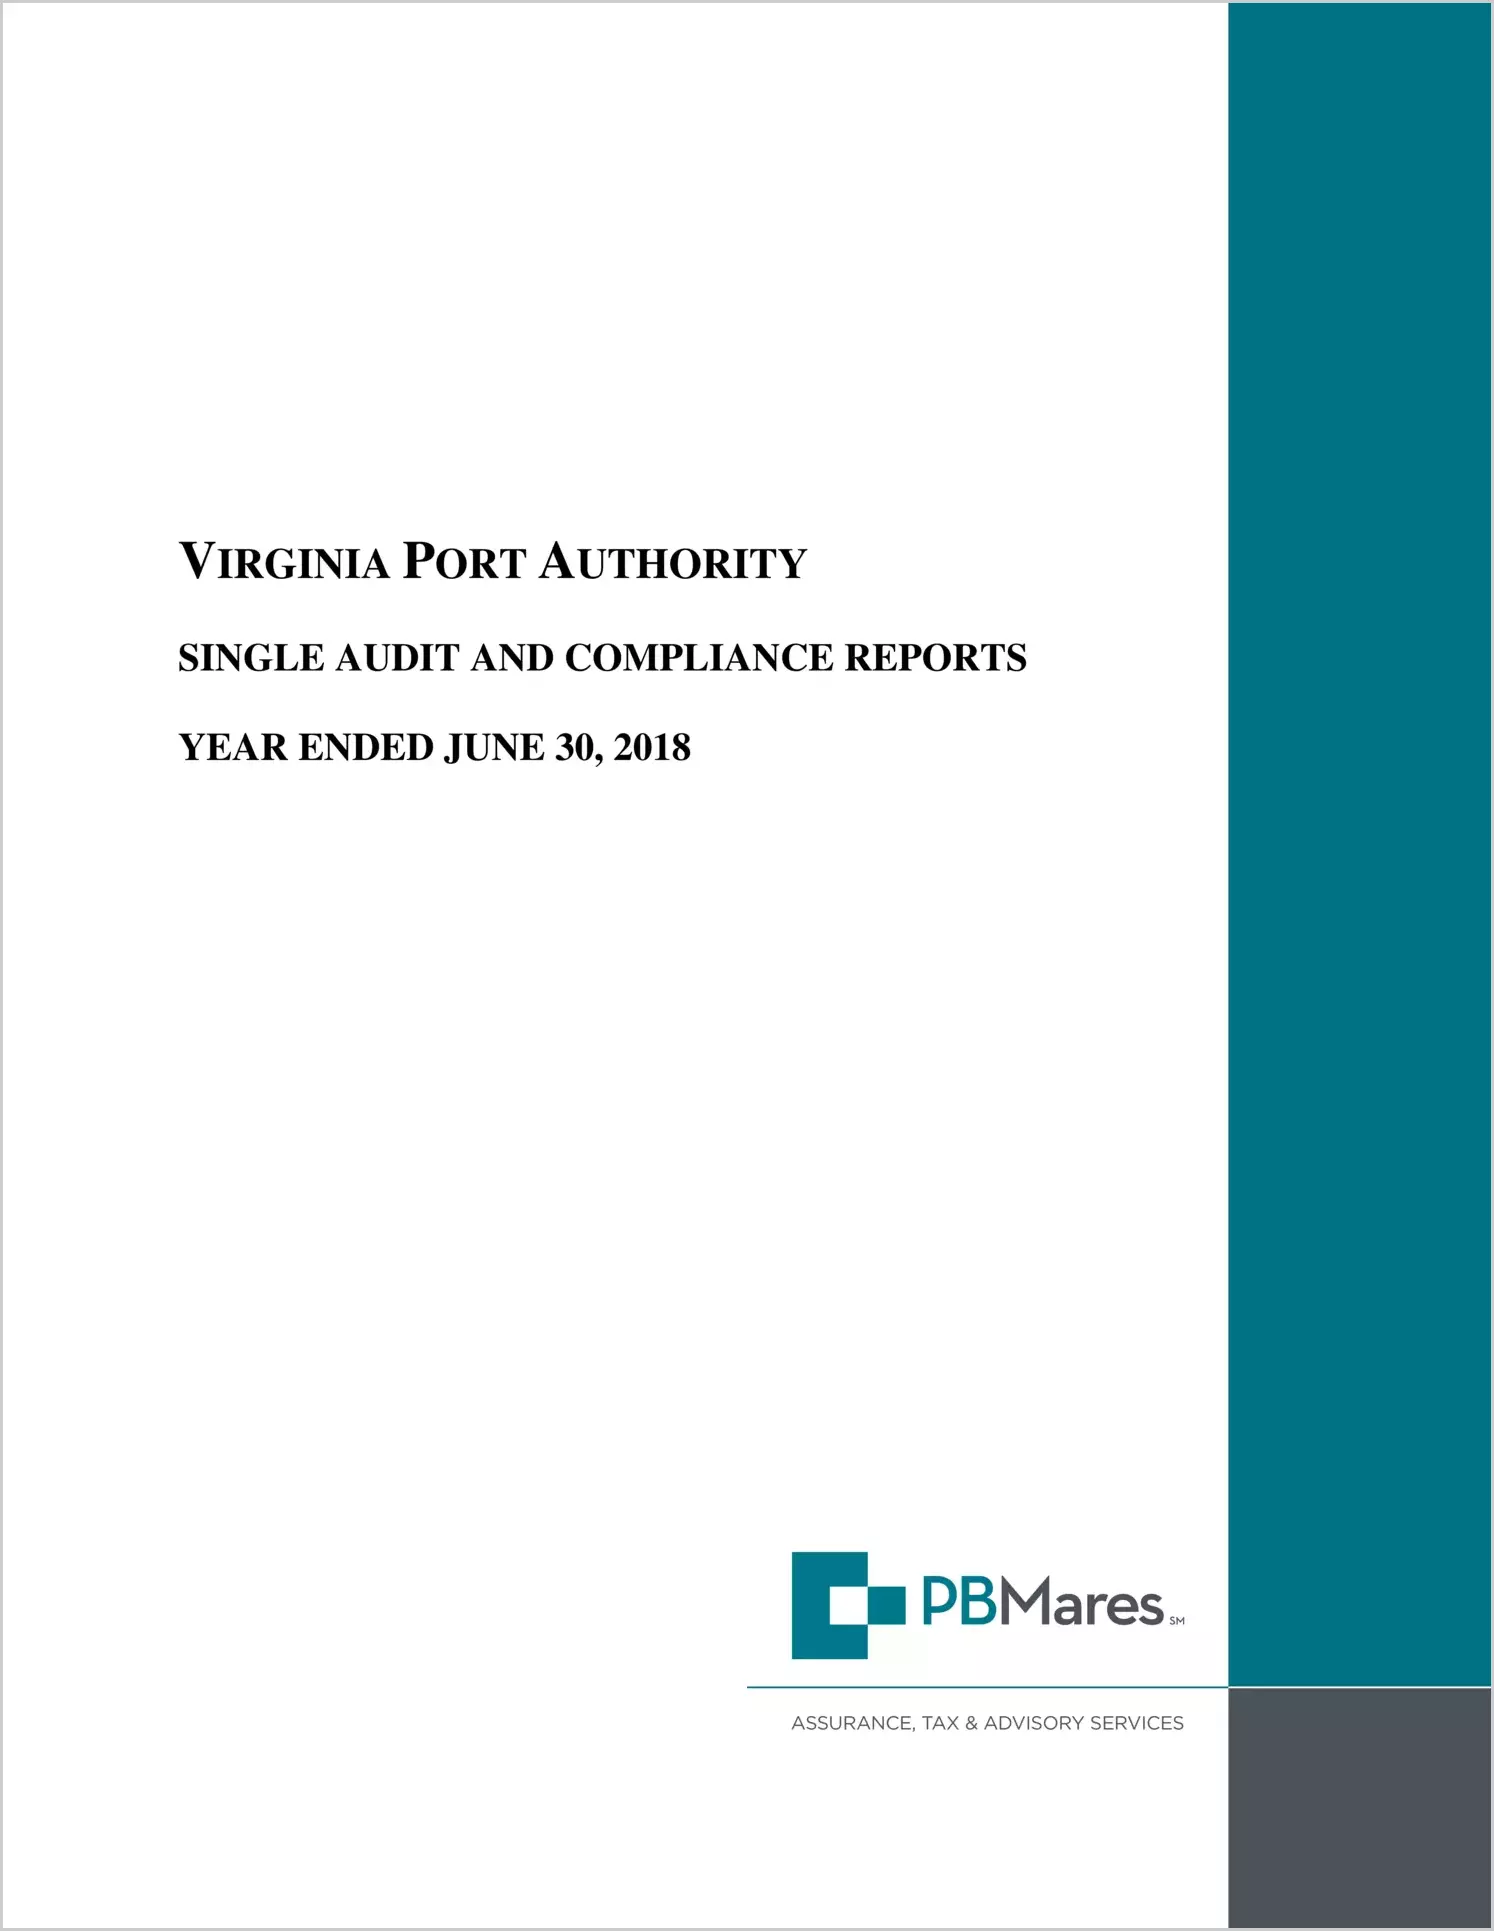 Virginia Port Authority for the year ended June 30, 2018